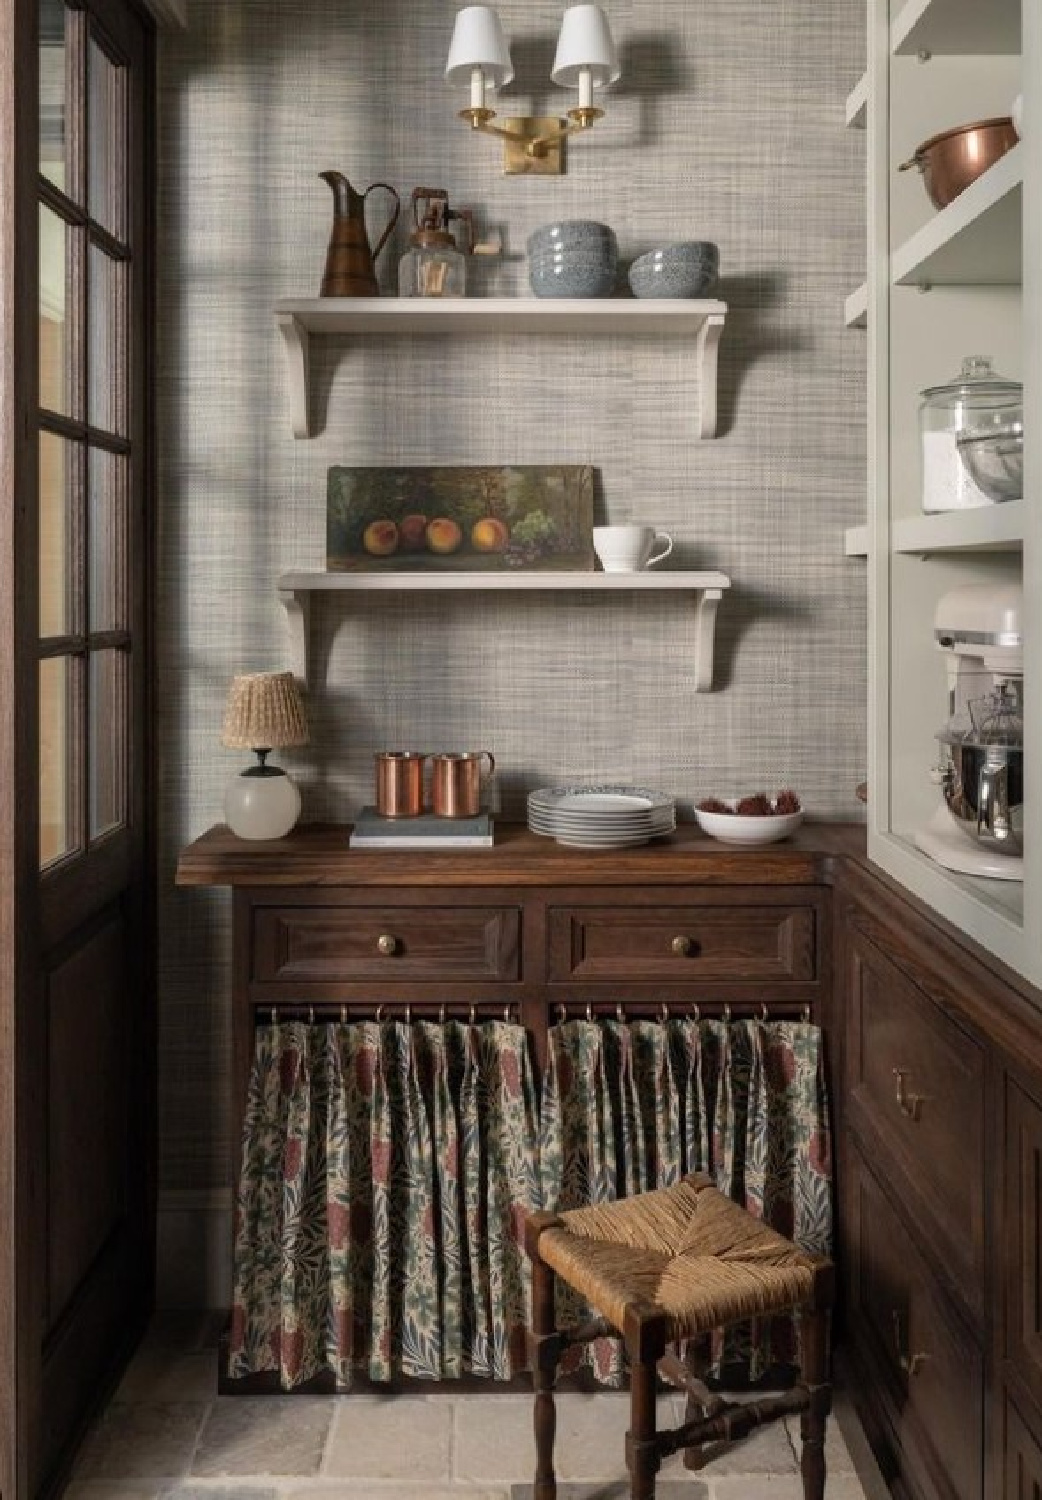 Whittney Parkinson designed pantry in Atlanta Whole Home 2023 with dark wood lowers, stone floors, grasscloth, painted shelves and skirted cabinet. Photo: Sarah Shields. #kitchenpantries #traditionalkitchens